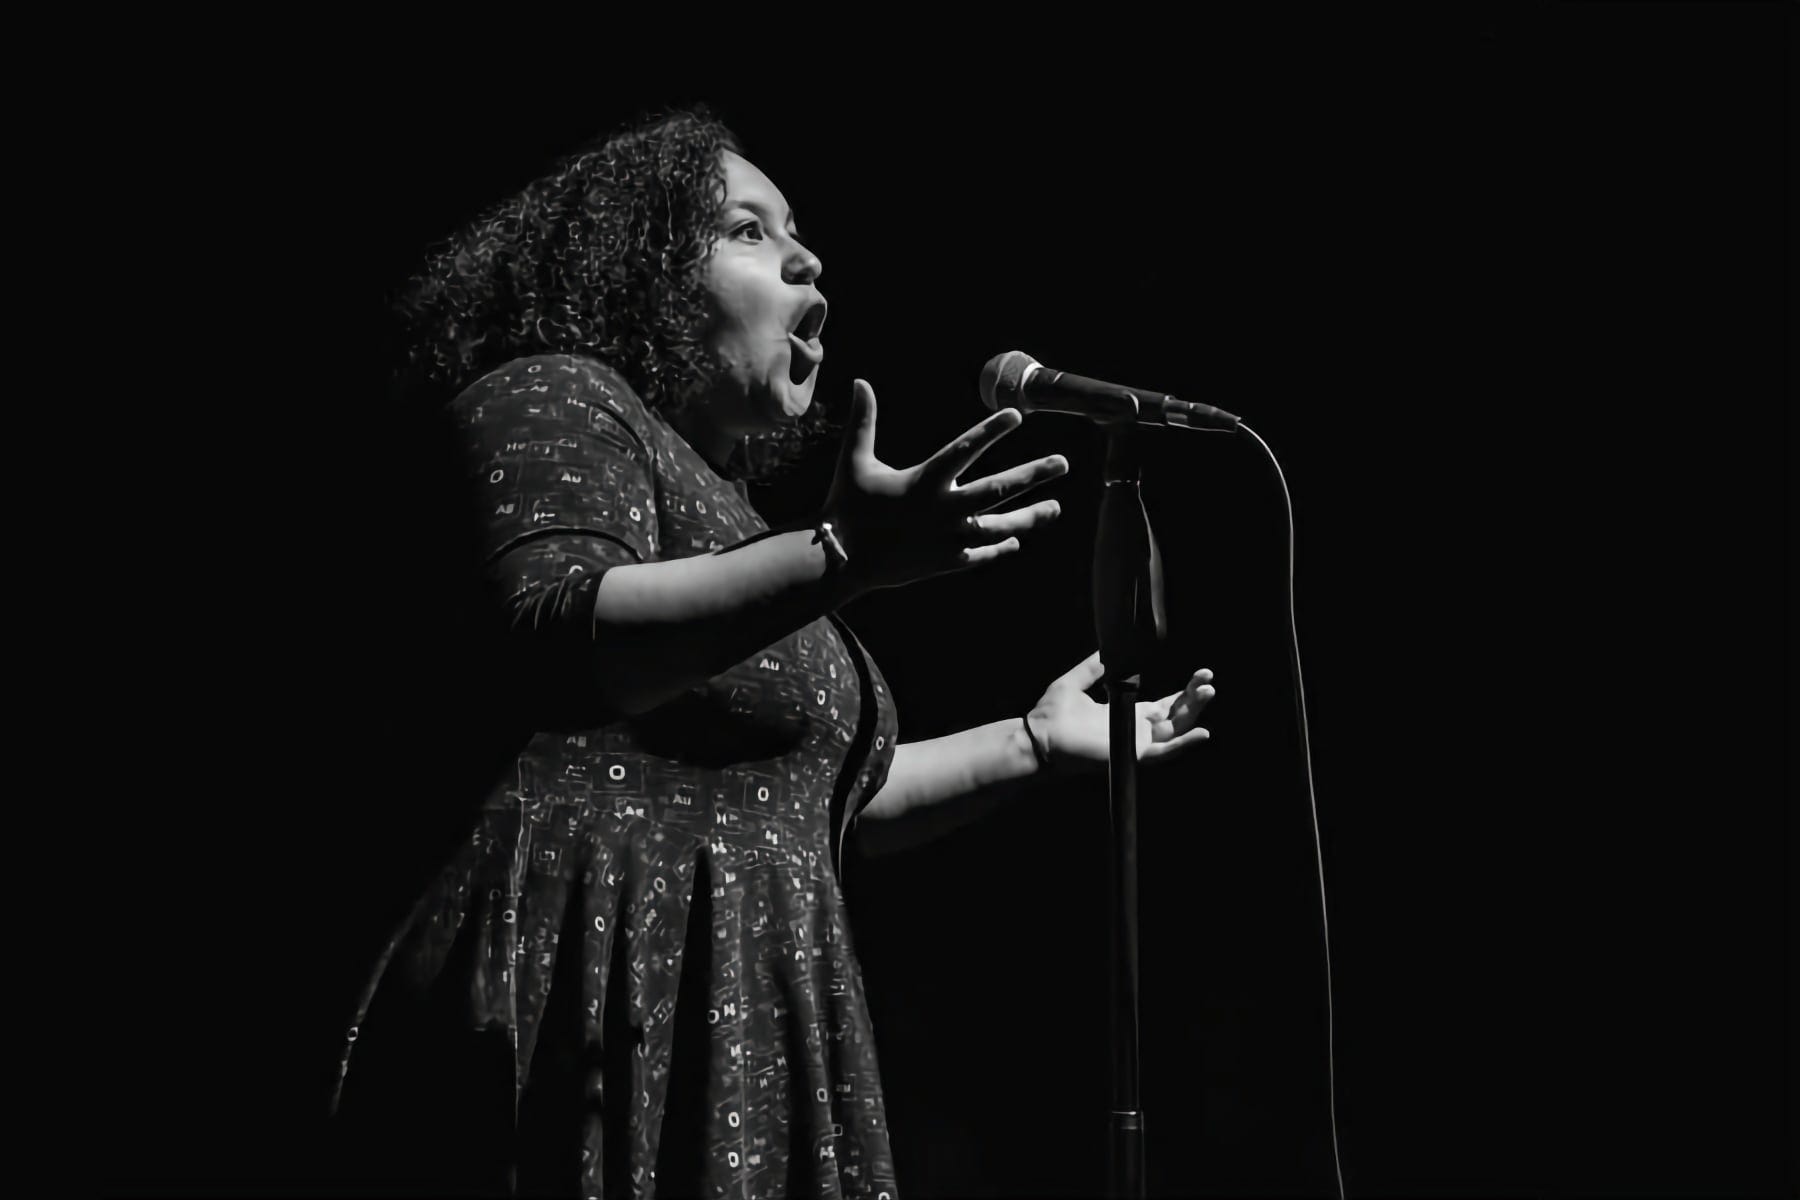 The image is a black and white photograph capturing poet Georgia Bartlett-McNeil in a moment of performance. She is positioned before a microphone, animatedly expressing herself with her mouth open as if caught mid-sentence, hands gesturing to emphasise her spoken word. The lighting casts her in a soft glow against a dark backdrop, highlighting the passion and intensity of her performance.